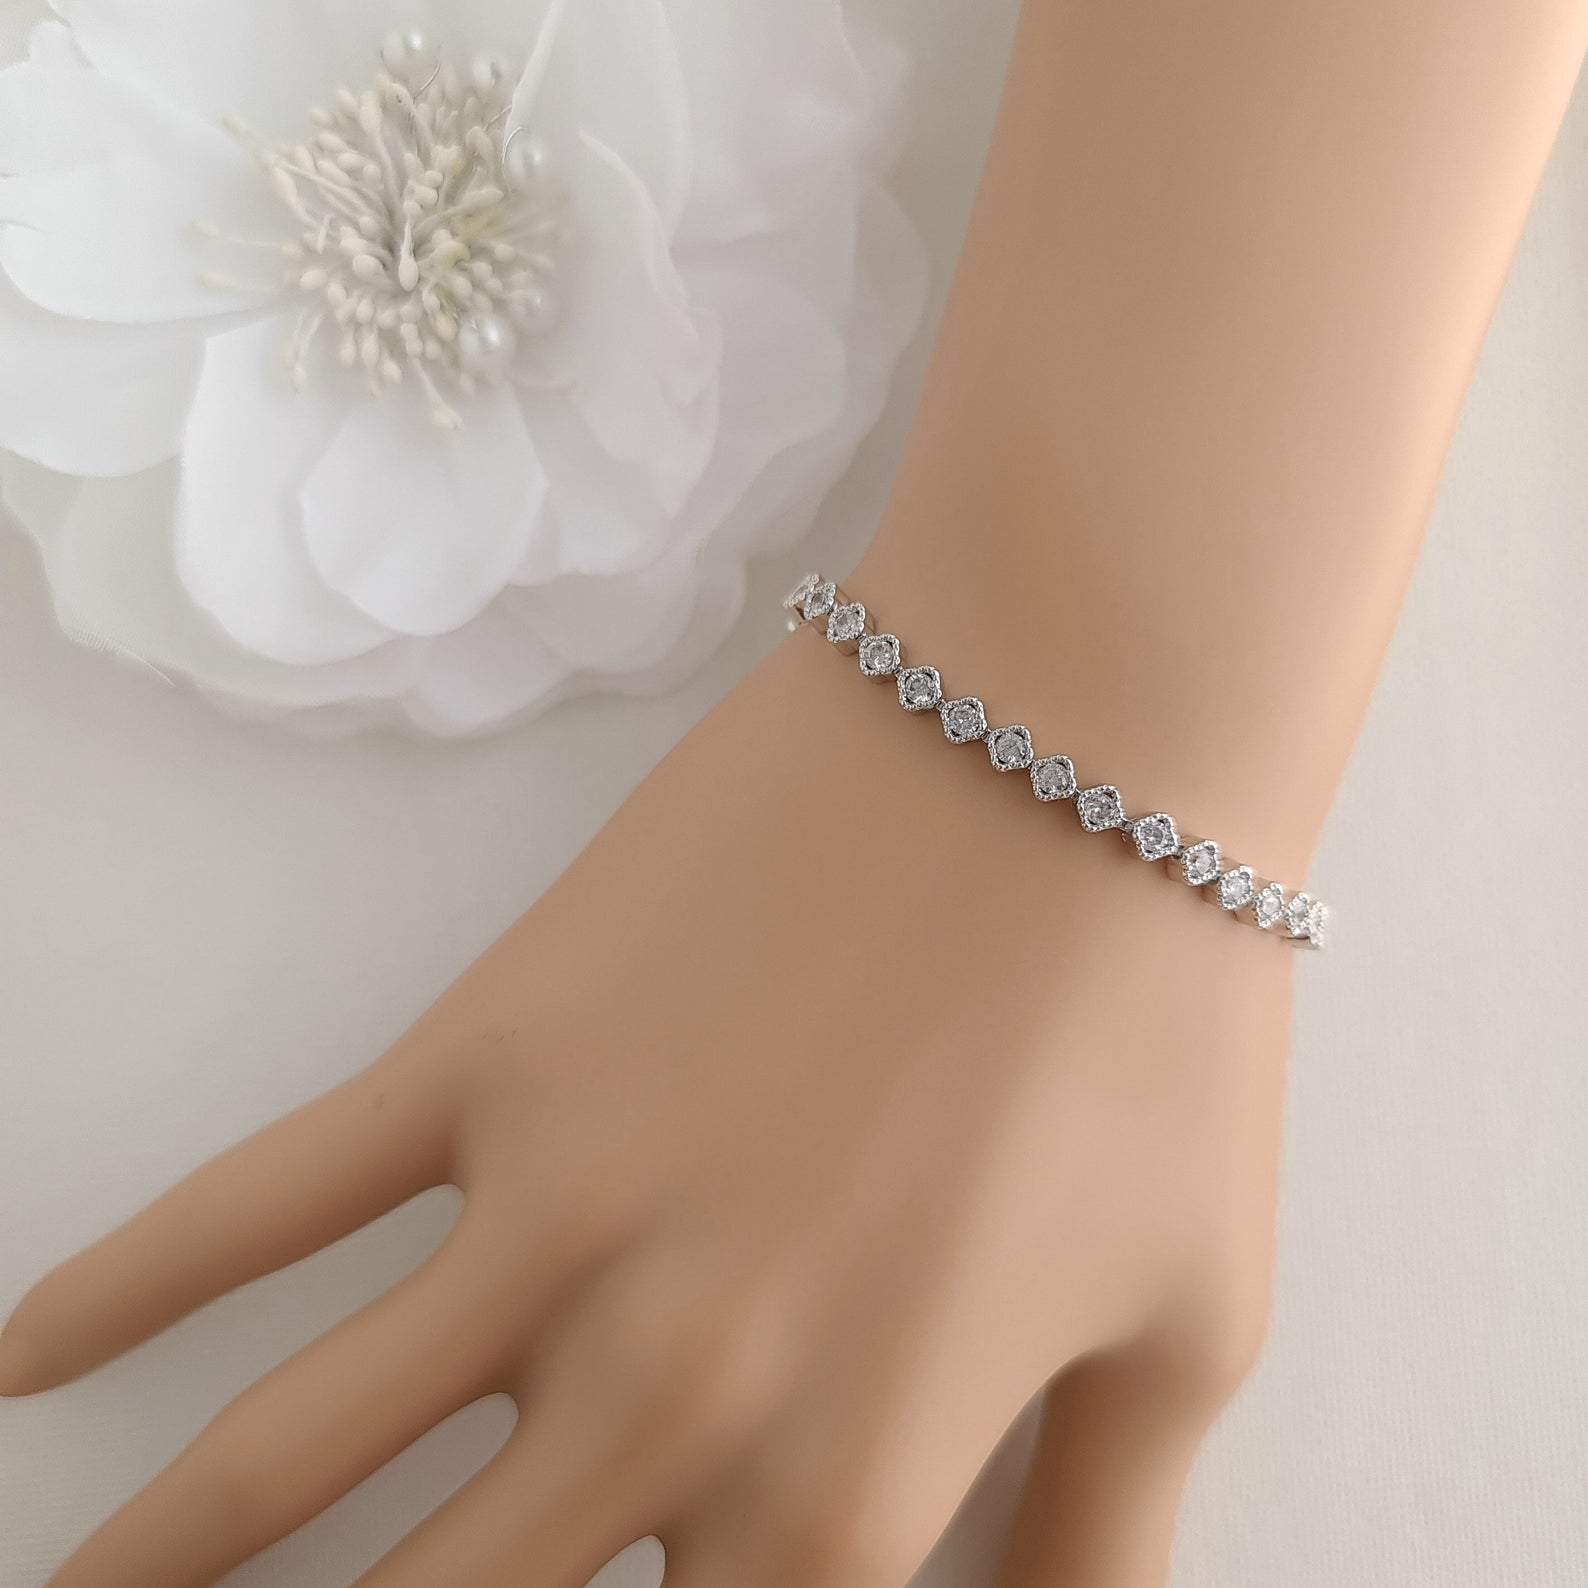 Sparkling Crystal Rhinestone Pearl Leaf Wedding Bracelet For Bride Perfect  Wedding Armband And Stretch Charm For Womens Jewelry Gift From Idealway,  $2.23 | DHgate.Com